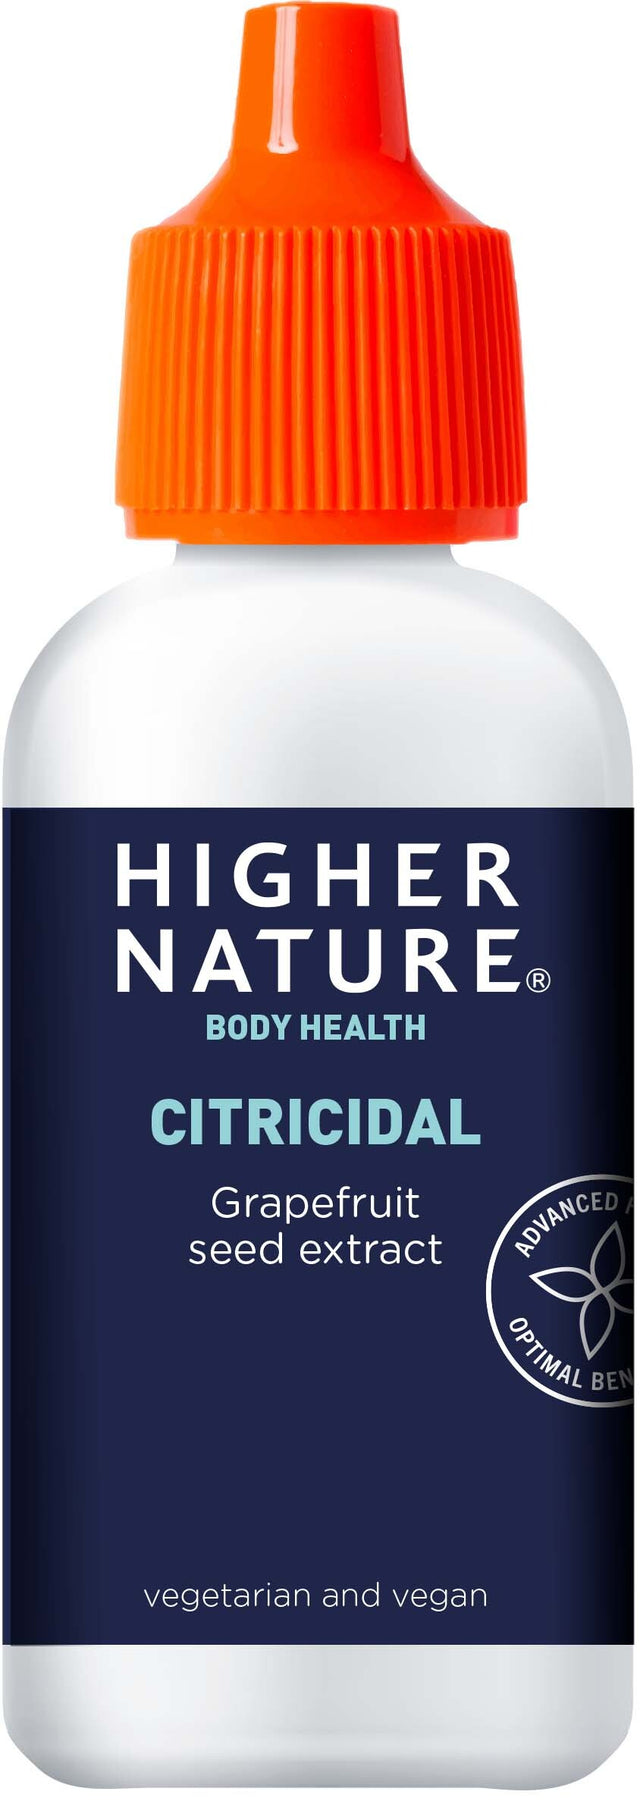 Higher Nature Citricidal, 25ml